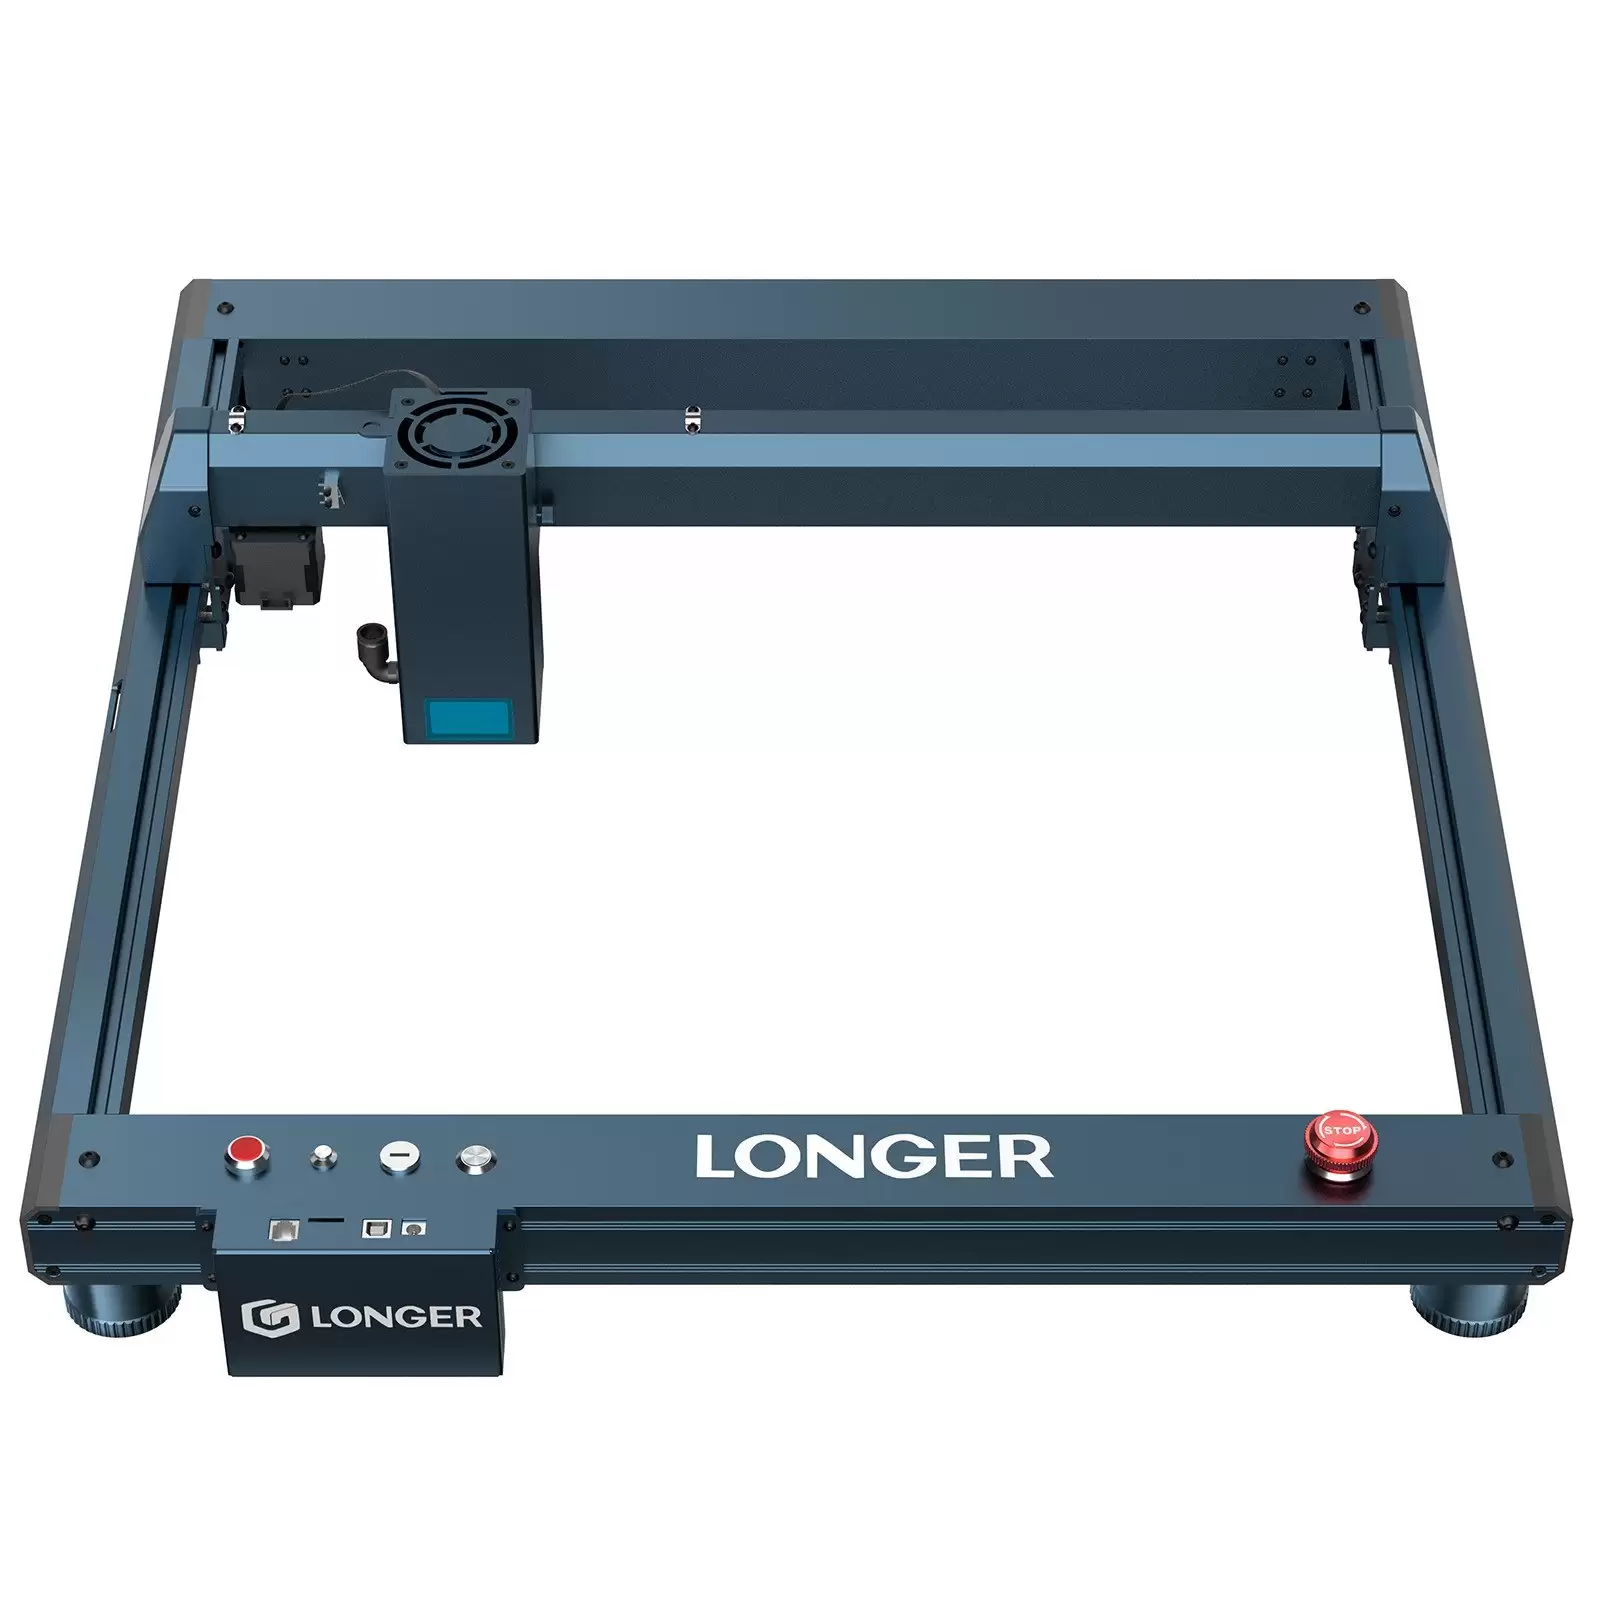 Order In Just $535 Longer Laser B1 20w Laser Engraver 24w With This Discount Coupon At Tomtop